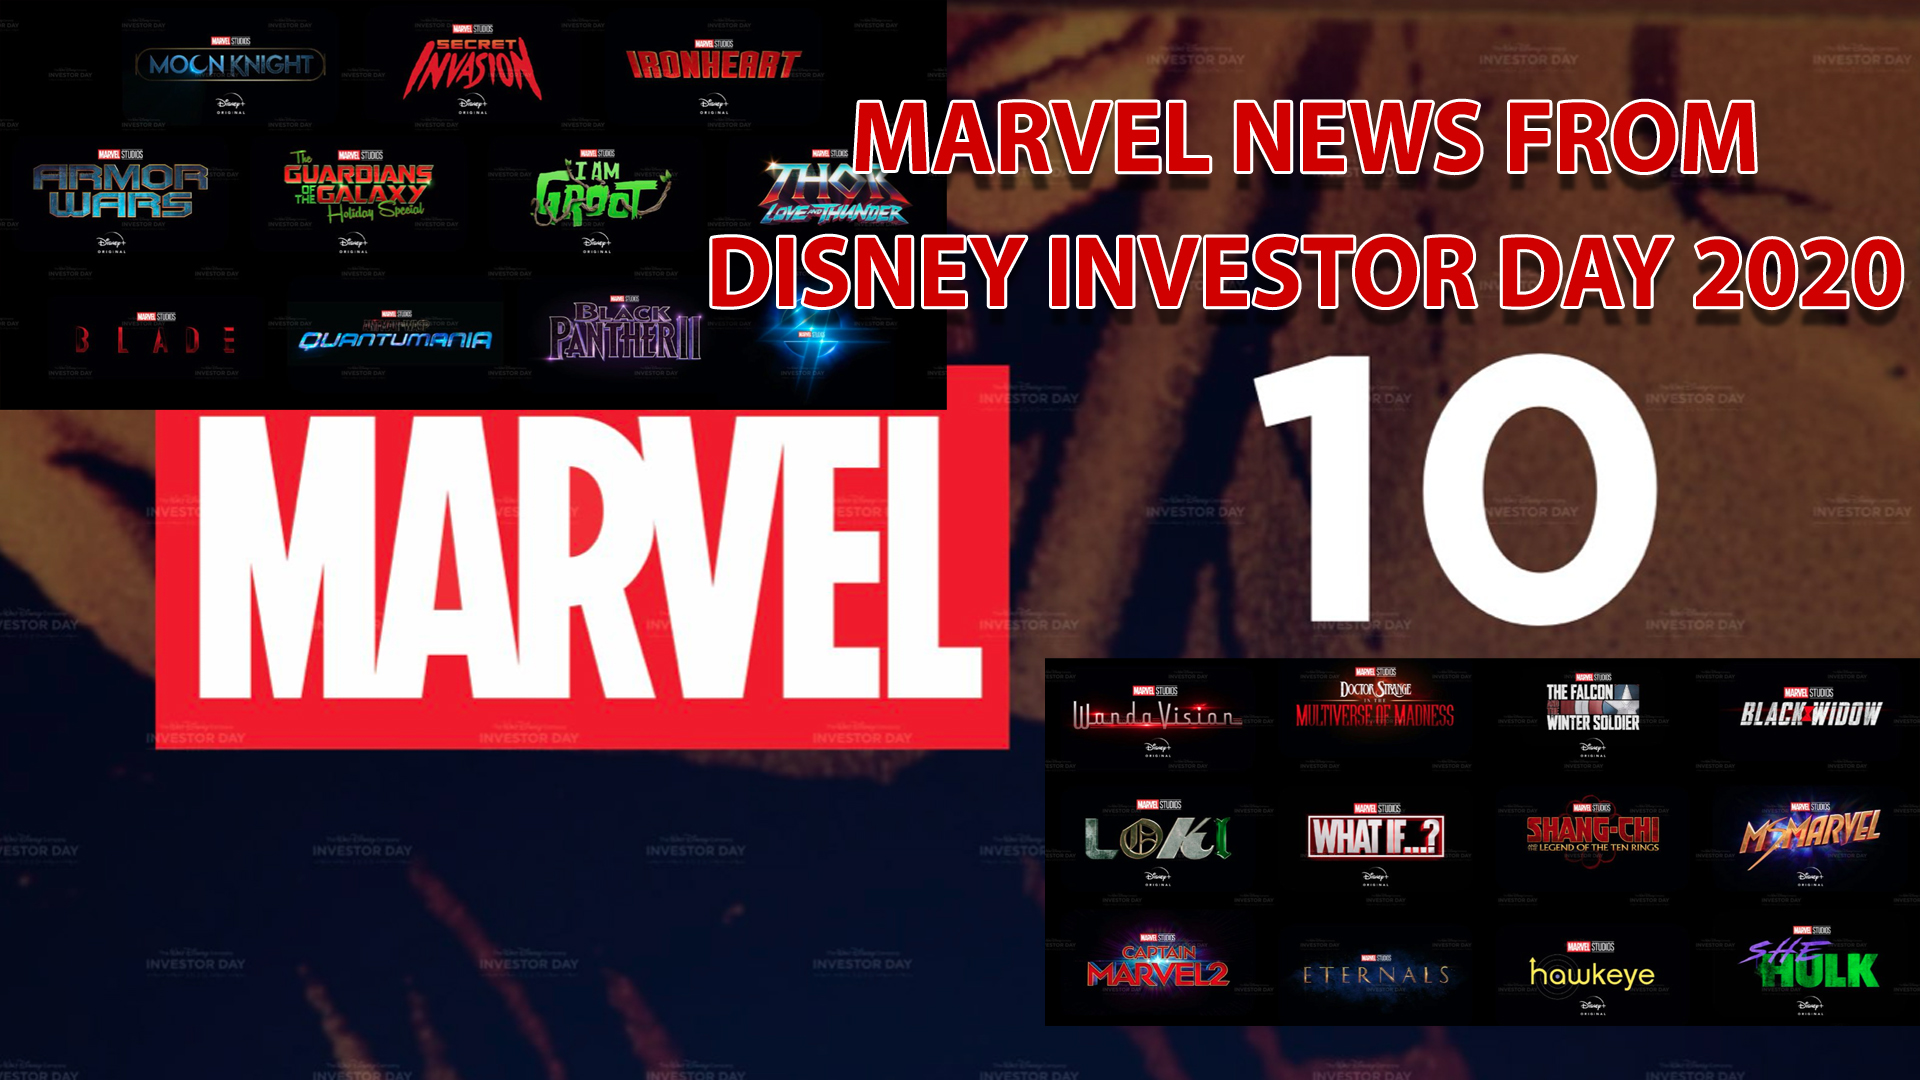 Many Exciting Marvel Series and Movie Announcements from Disney Investor Day 2020